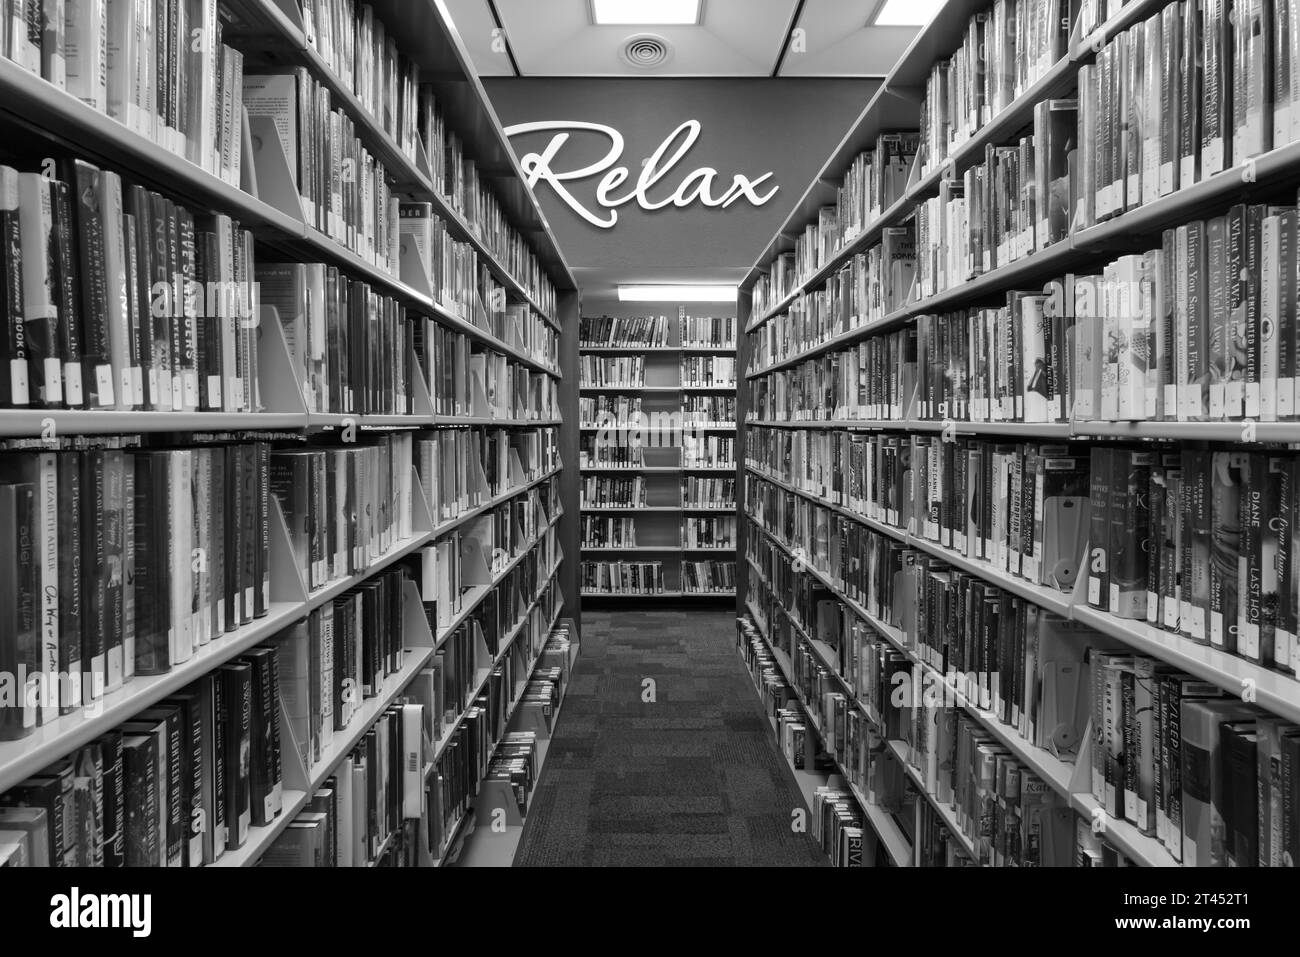 Books on shelves in a public library, with a 'Relax' sign on the wall Stock Photo